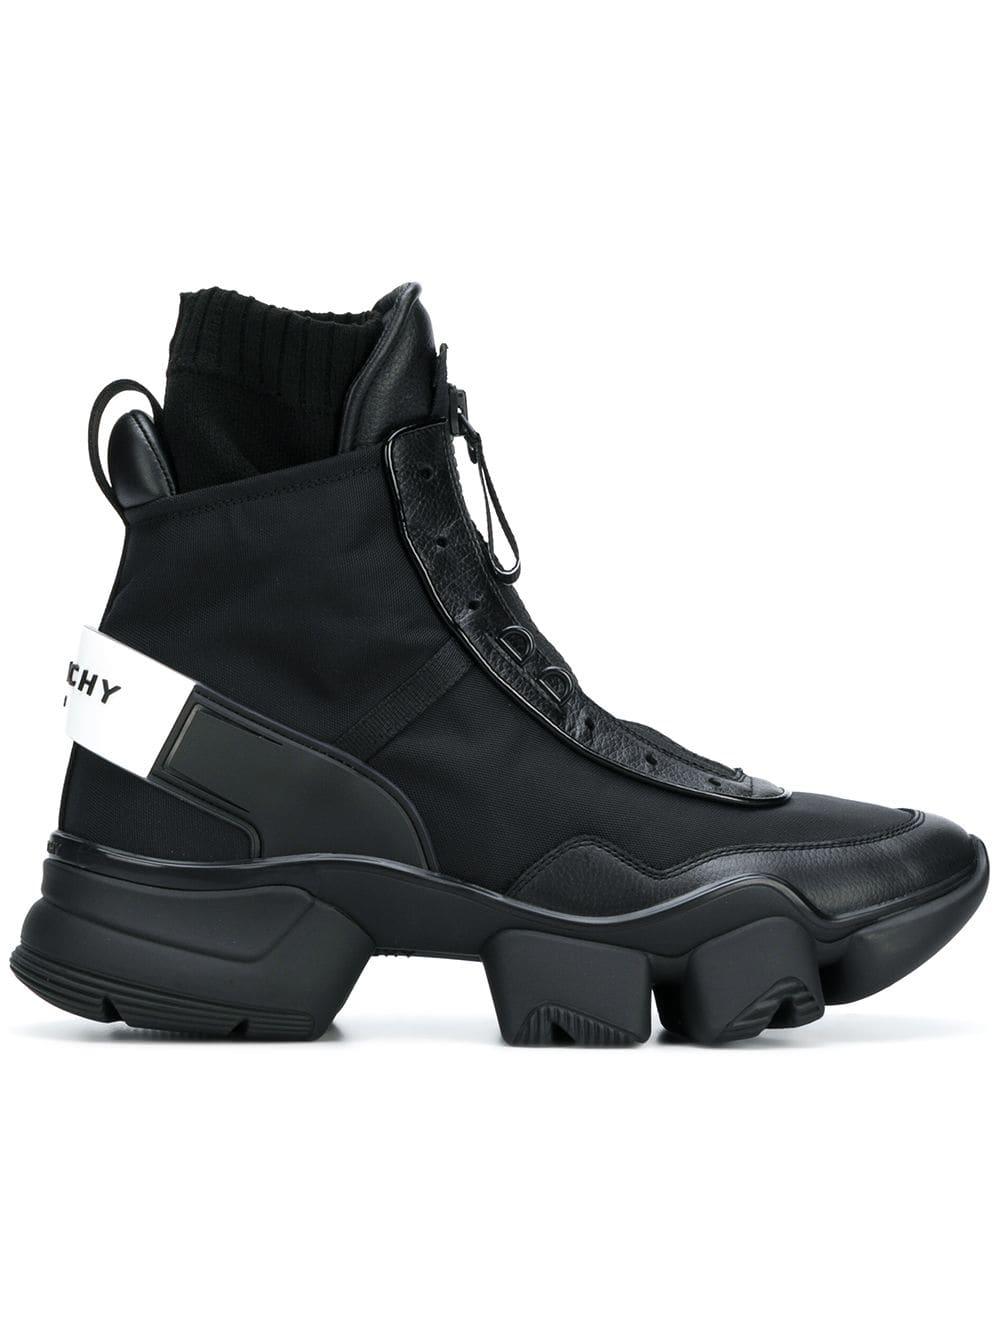 givenchy jaw sneakers sale